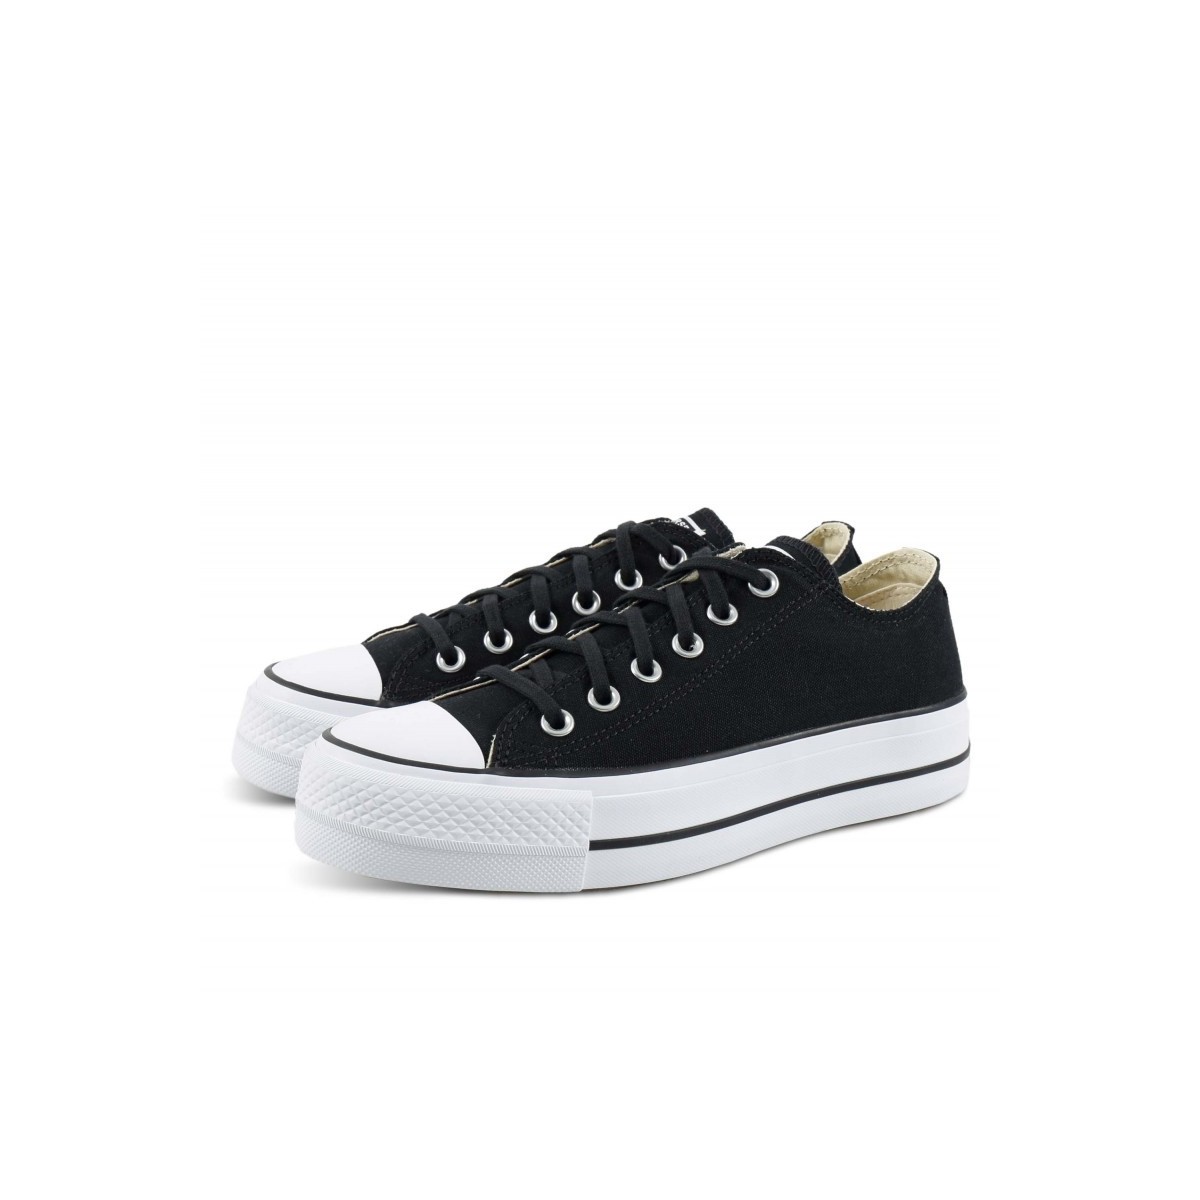 CONVERSE CHUCK TAYLOR ALL STAR LIFT LOW TOP 560250C Μαύρο